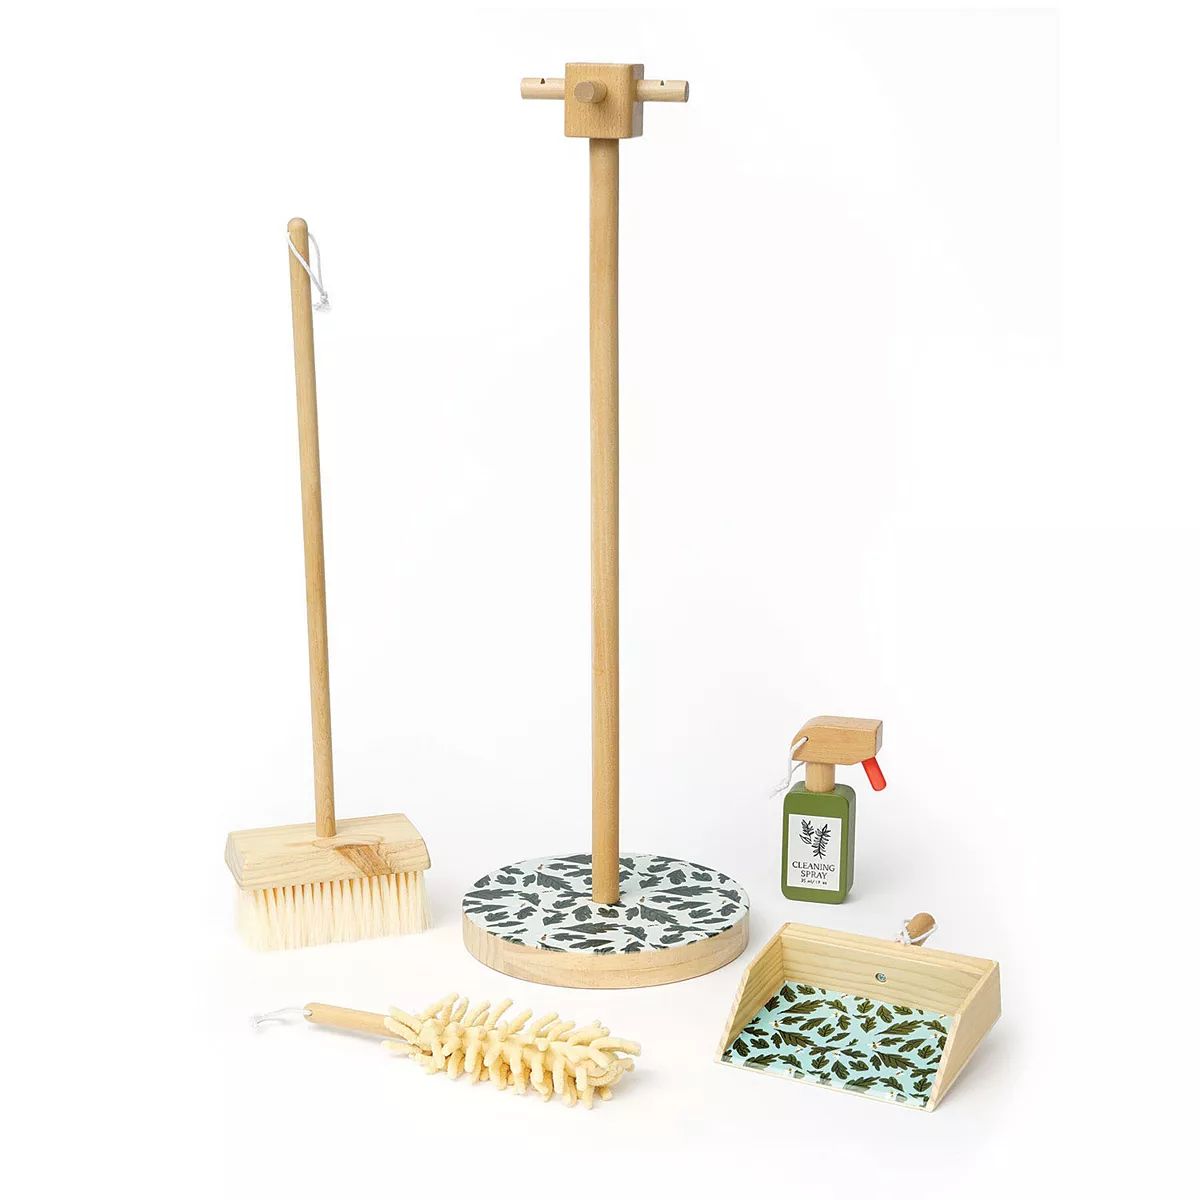 Manhattan Toy Wooden Spruce Housekeeping Cleaning Set | Kohl's